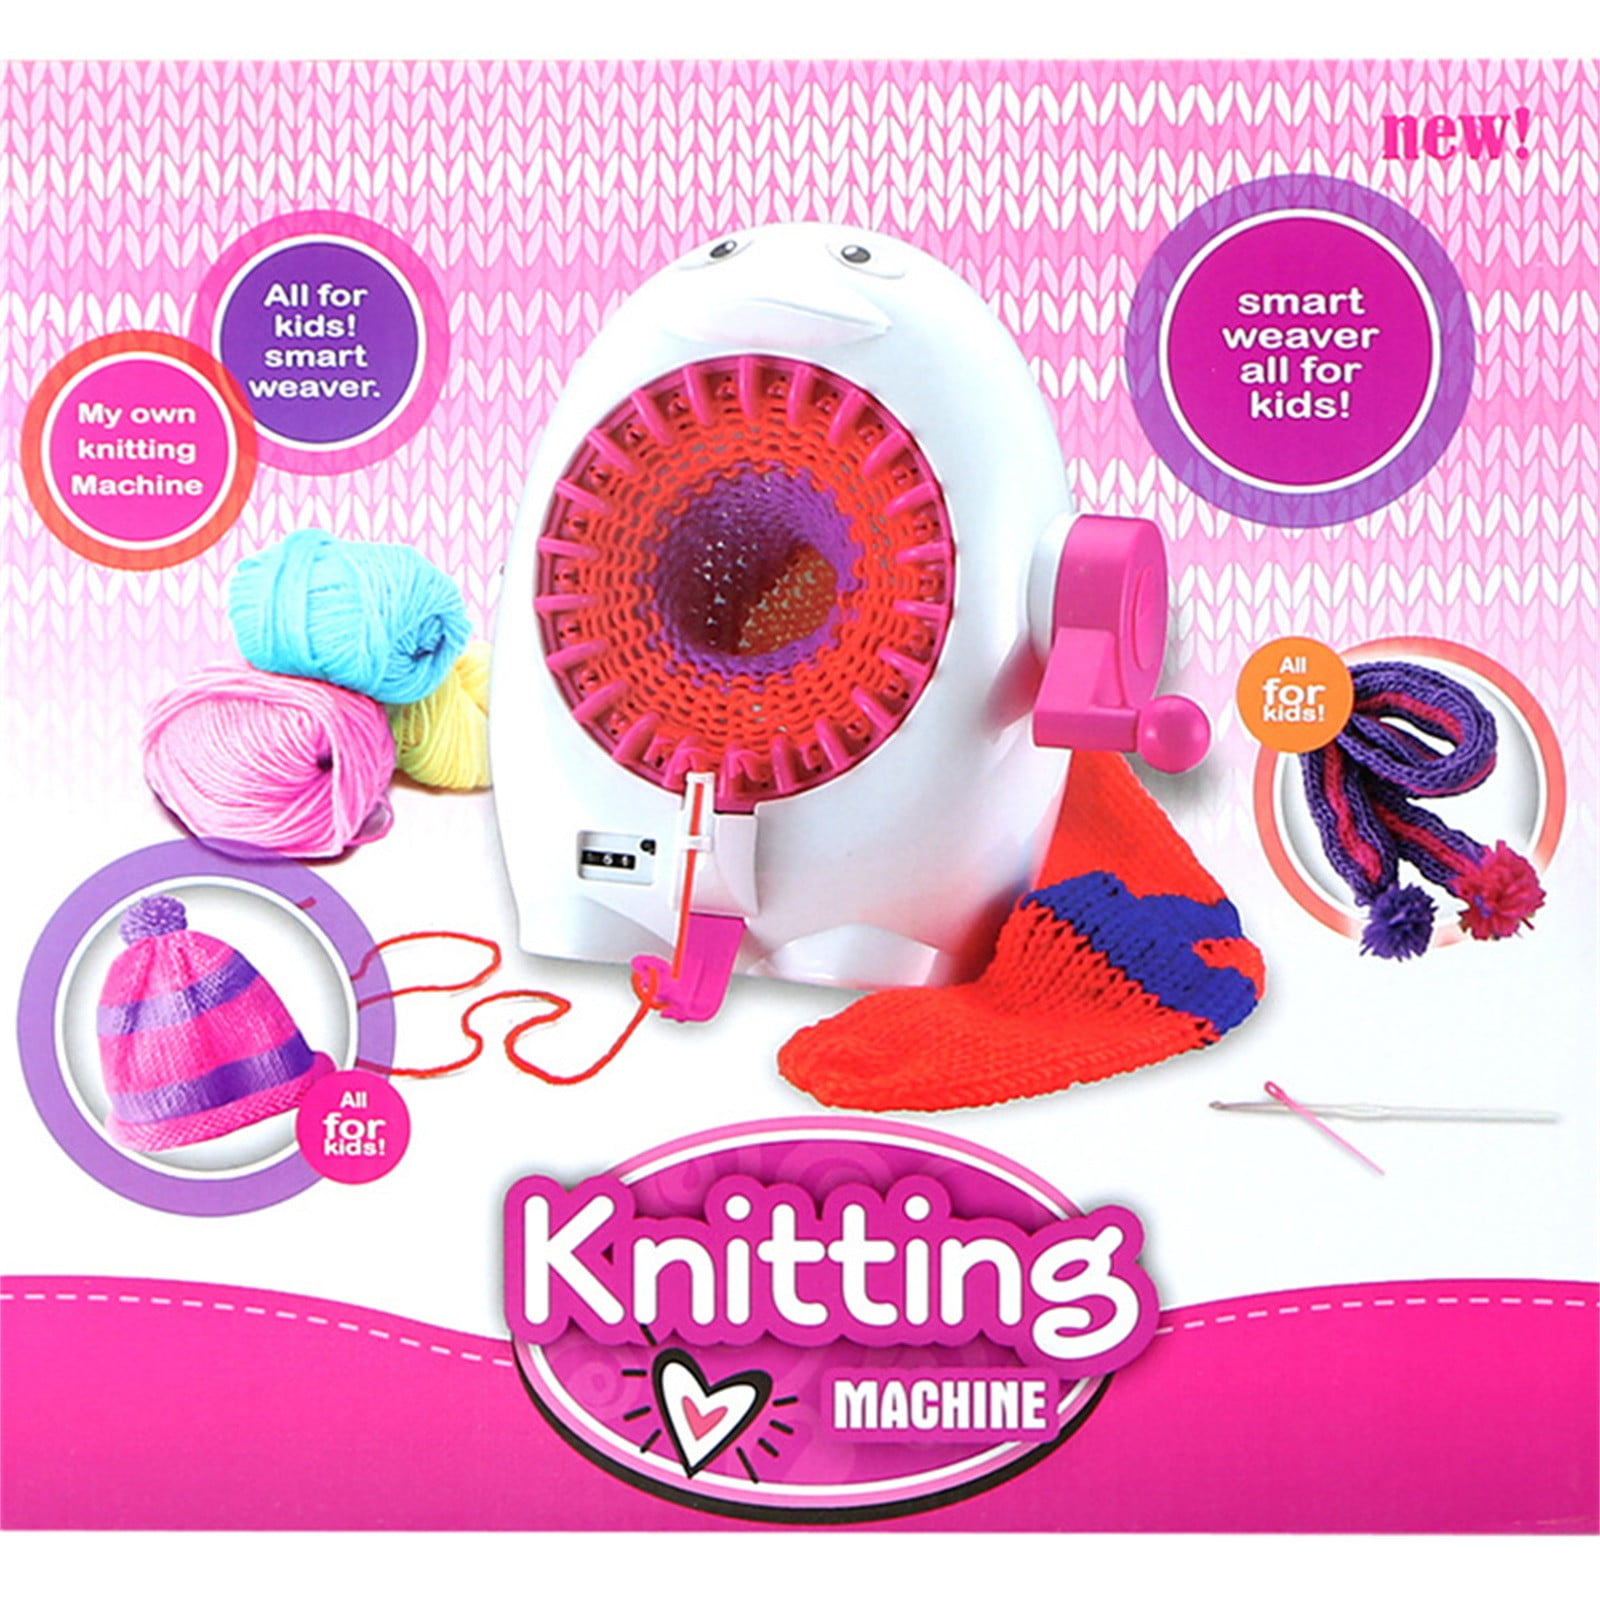 Handmade Weaving Knitting Machine Round Knitting Looms Kit DIY Sewing Toy Set Educational Toy for Children Handmade Hat Scarves Sweater